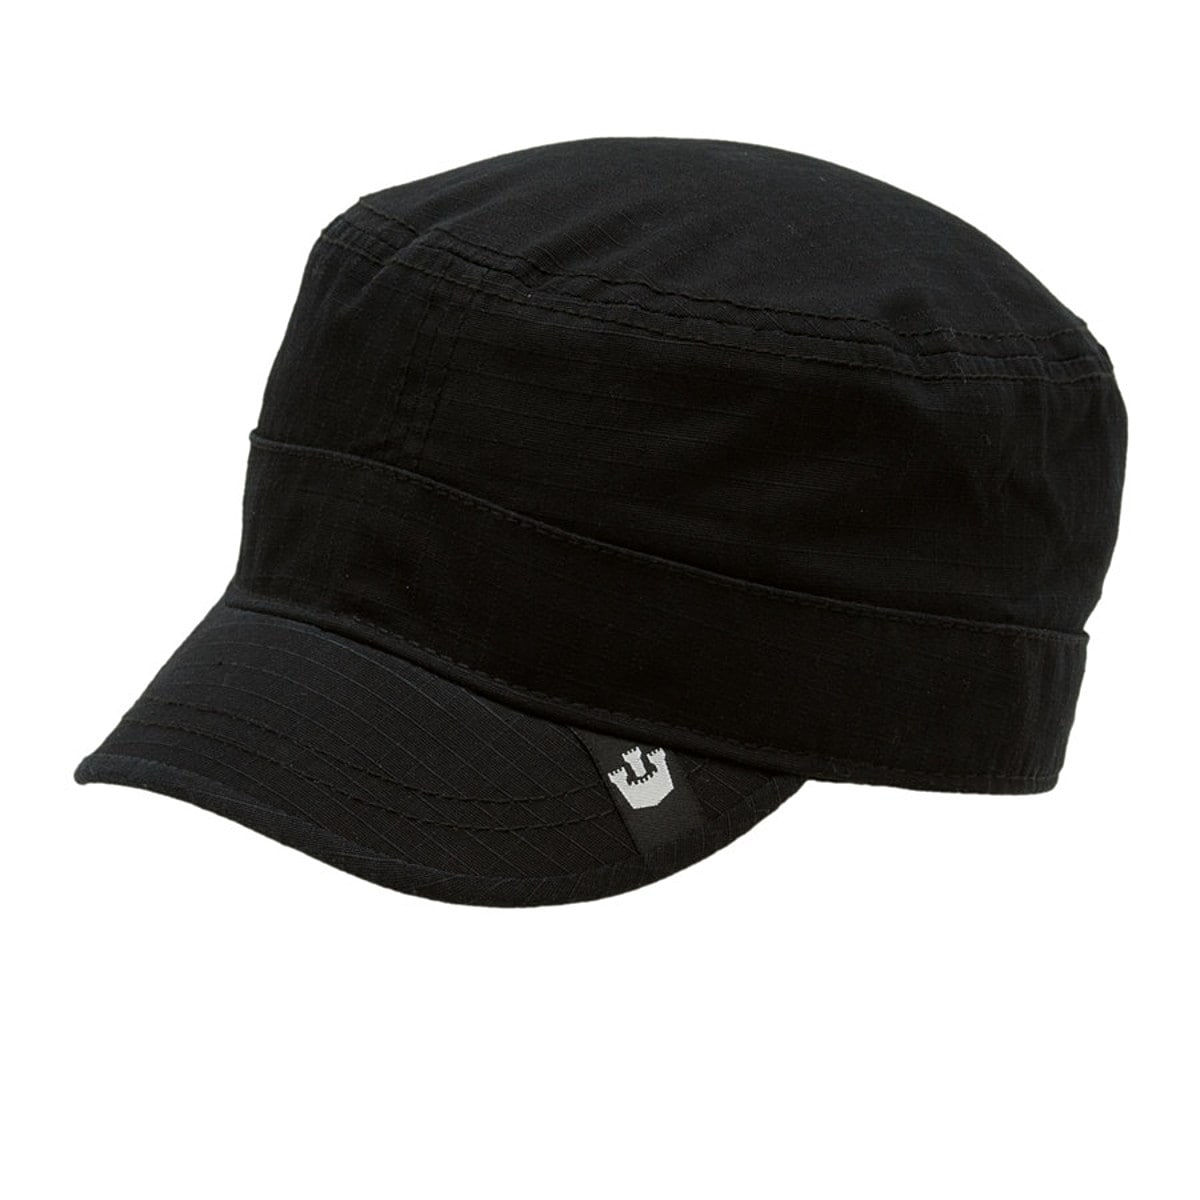 Goorin Brothers Private Cadet Hat Black, S